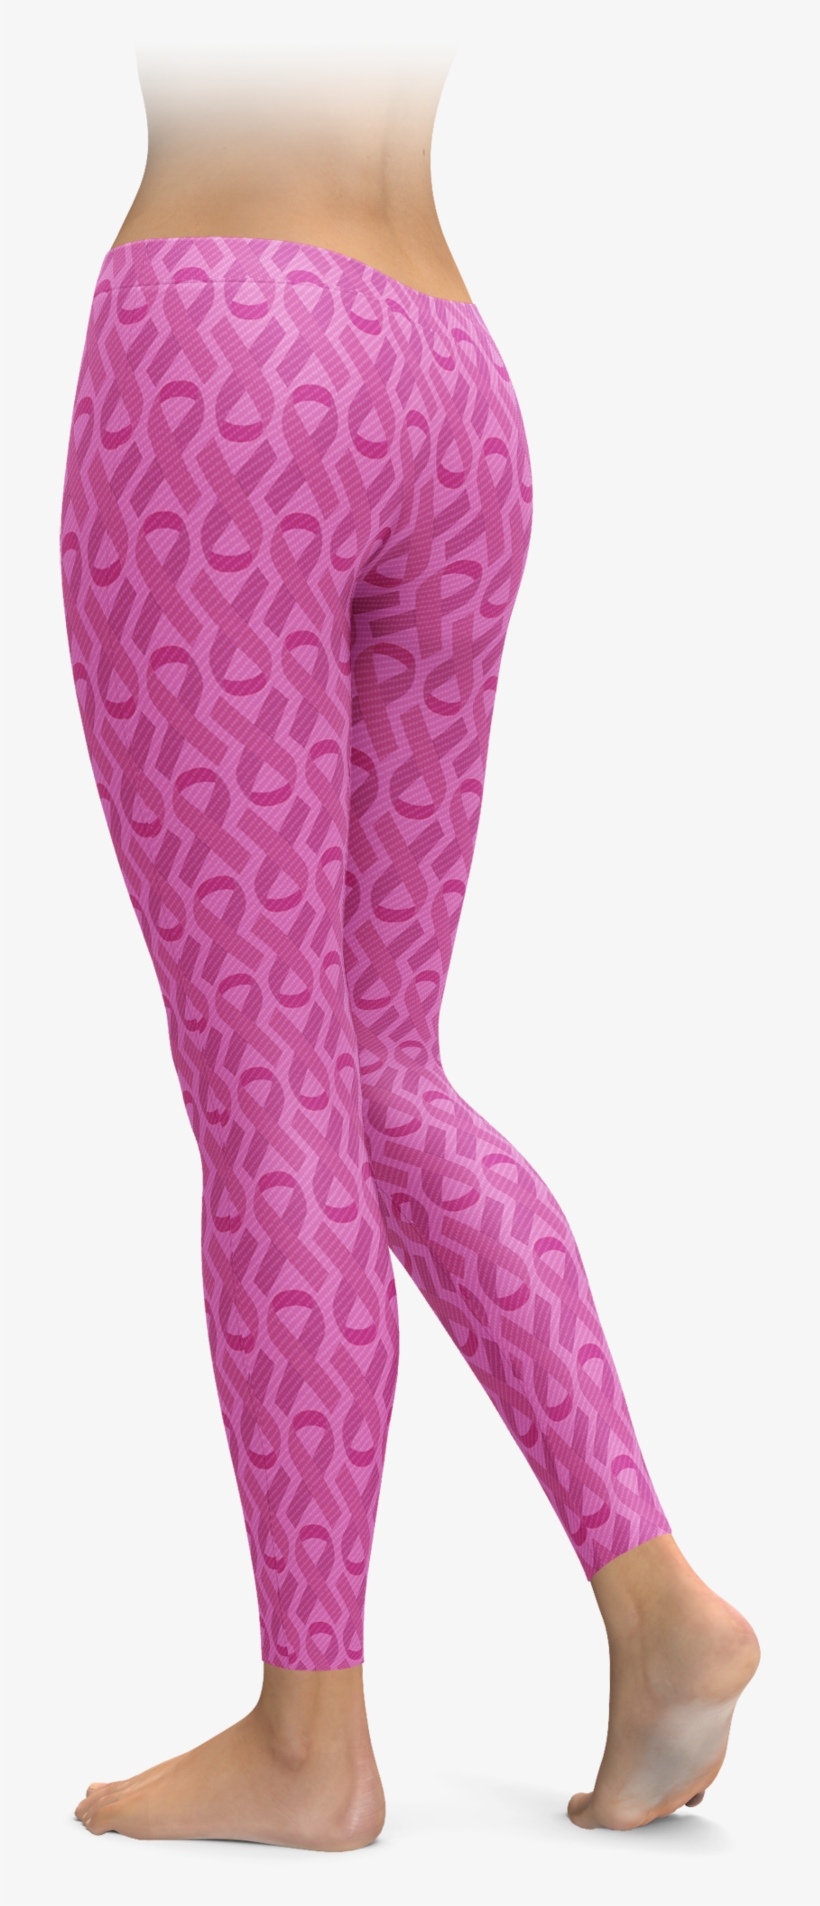 Stay Stylish And Raise Awareness With These Awesome - Leggings, transparent png #7592287